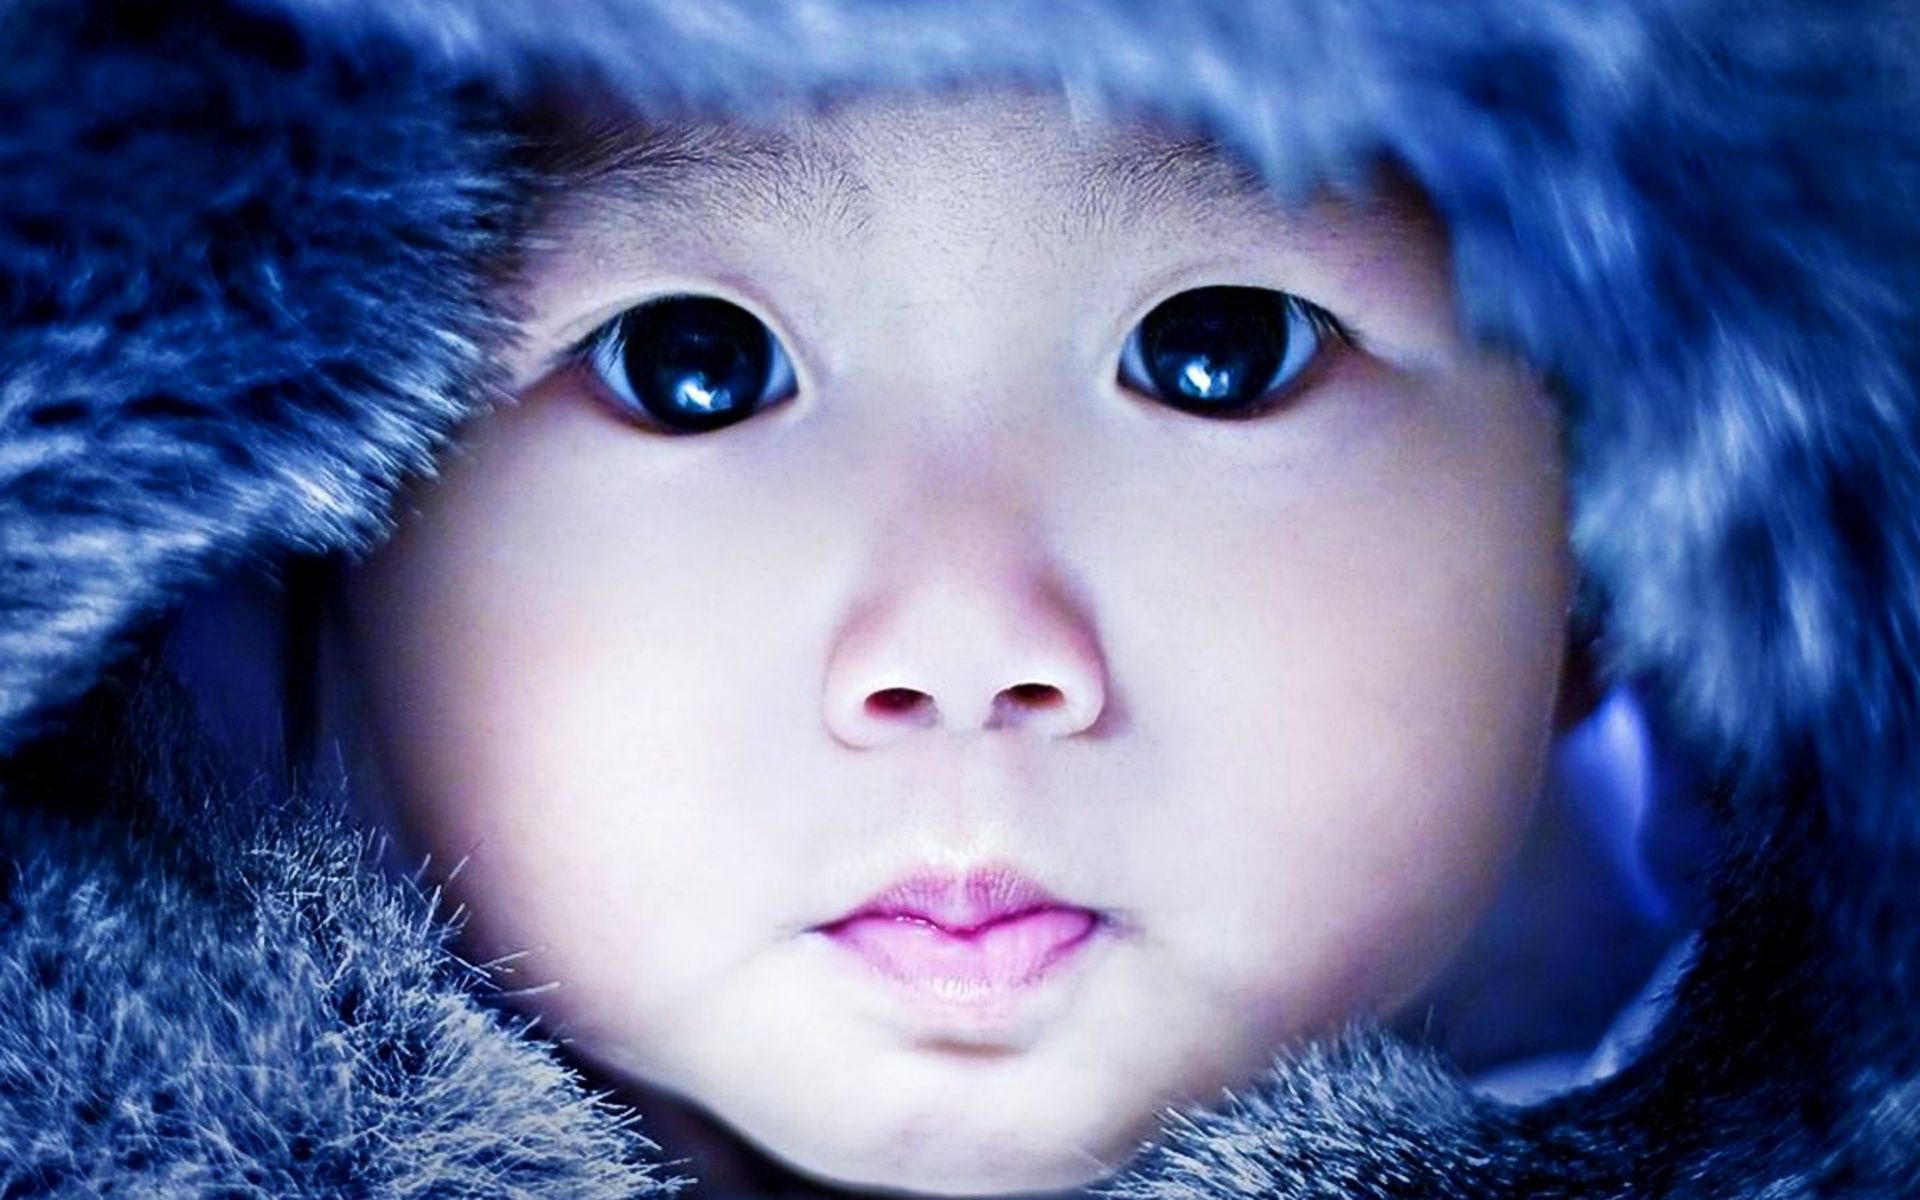 Baby Eyes Wallpaper Cute Pictures Newborn